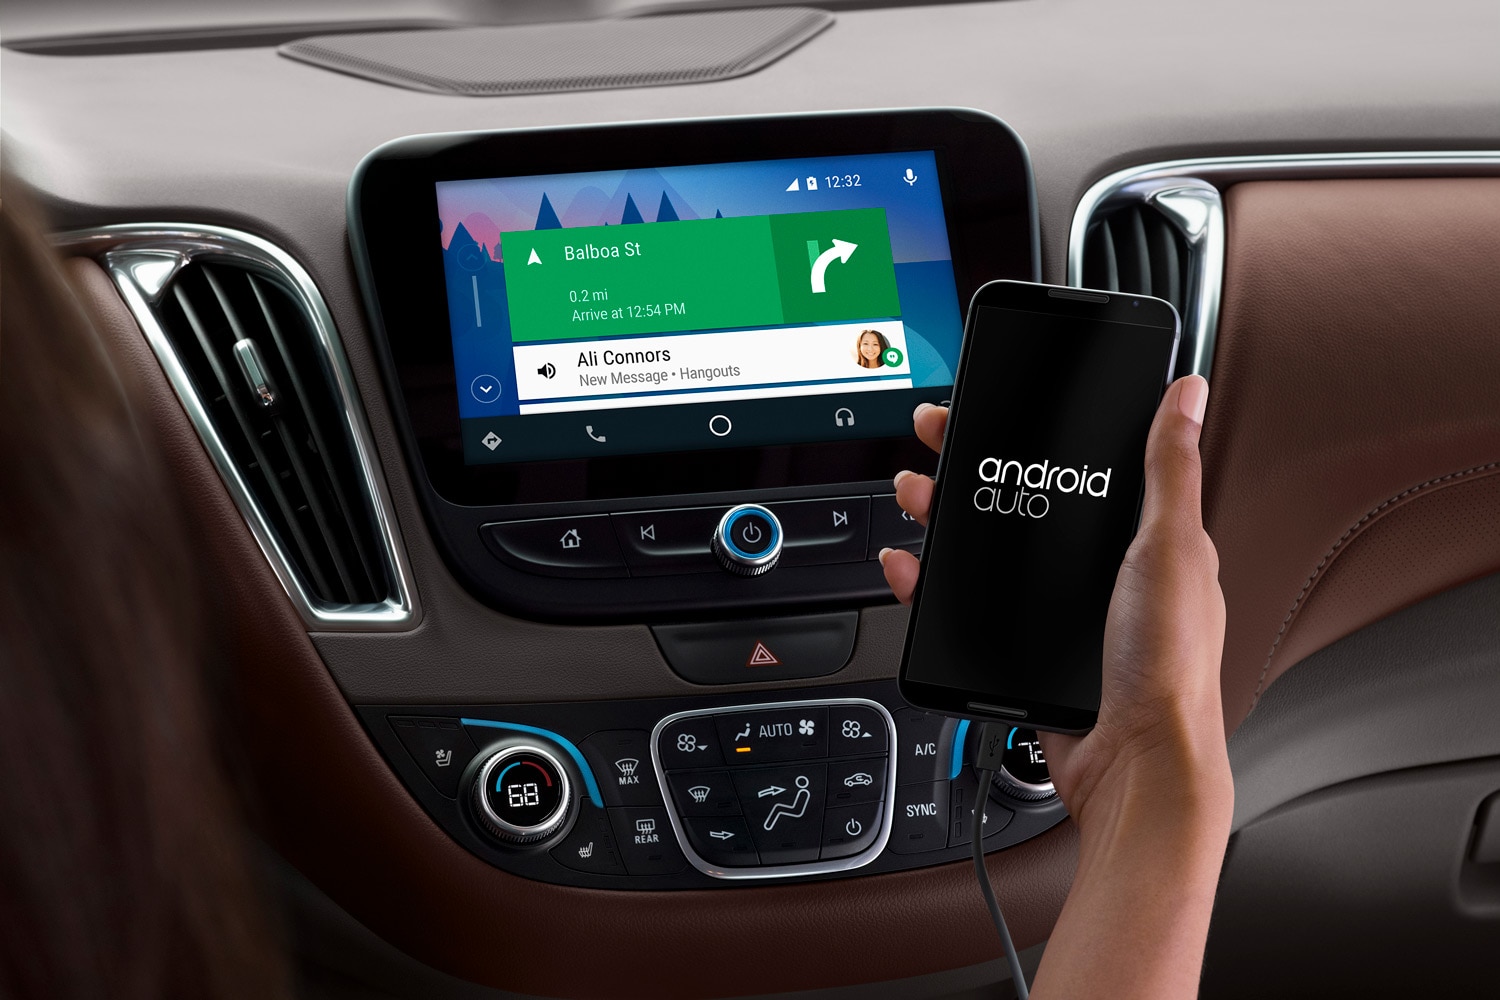 Chevrolet Malibu with Android Auto